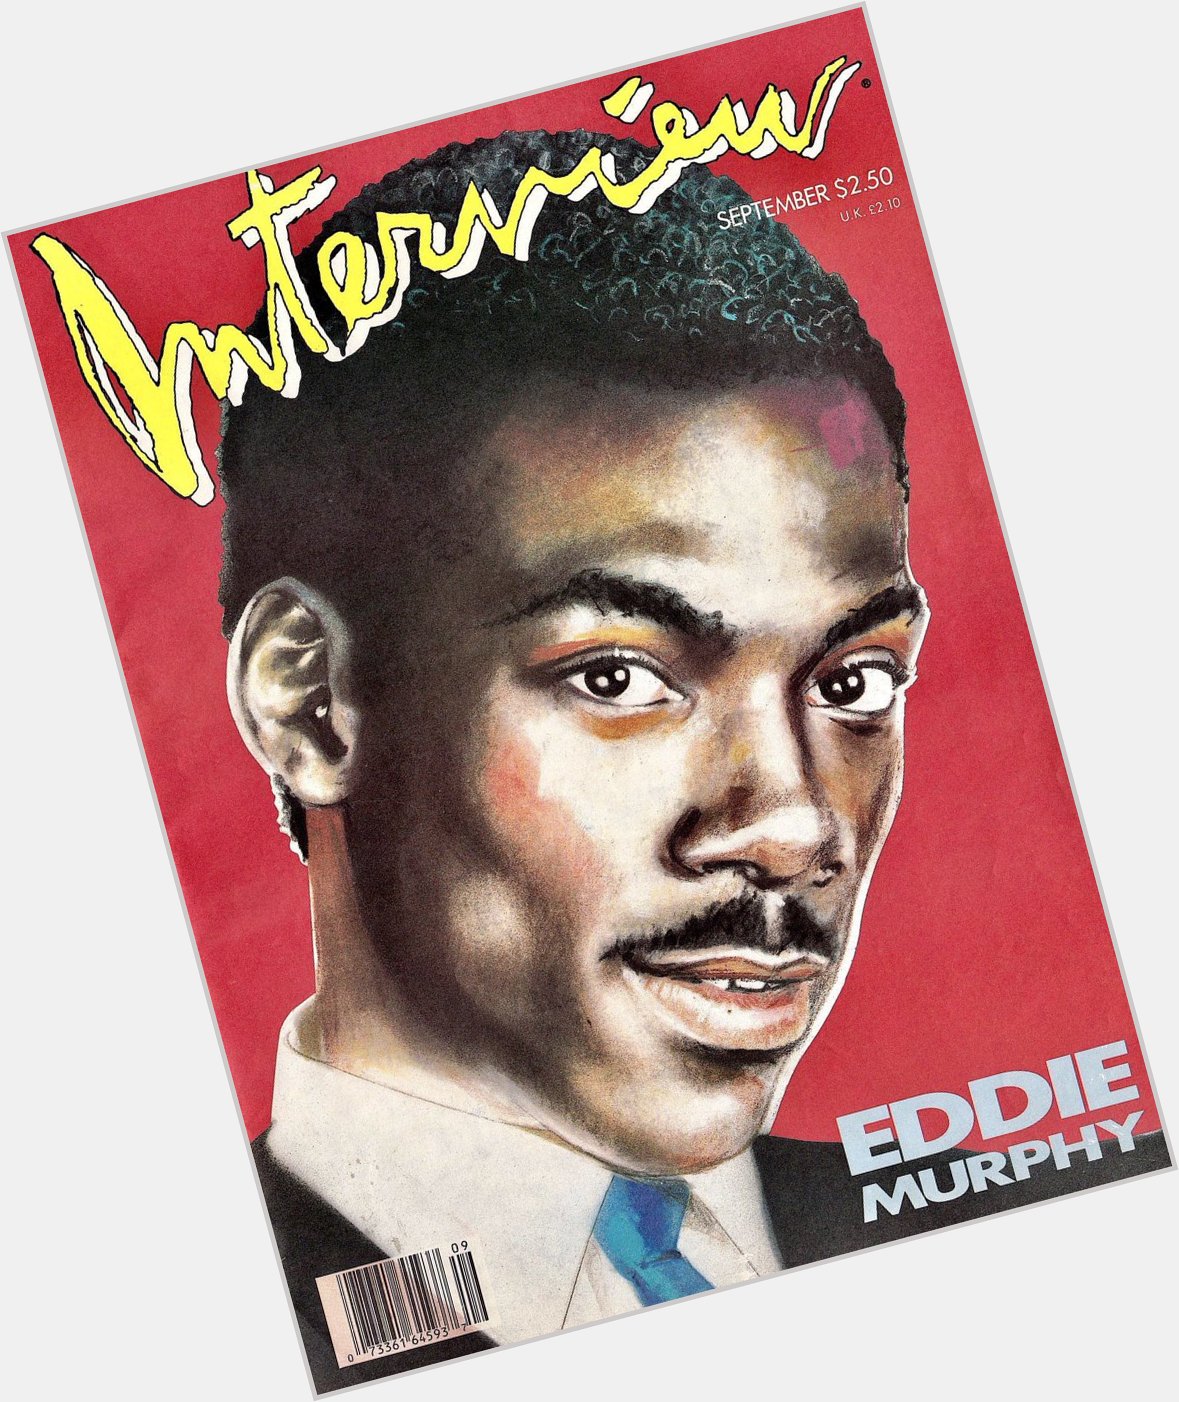 Happy Birthday, Eddie Murphy. An American Icon. Movies and stand up celebrated around the world!!! 